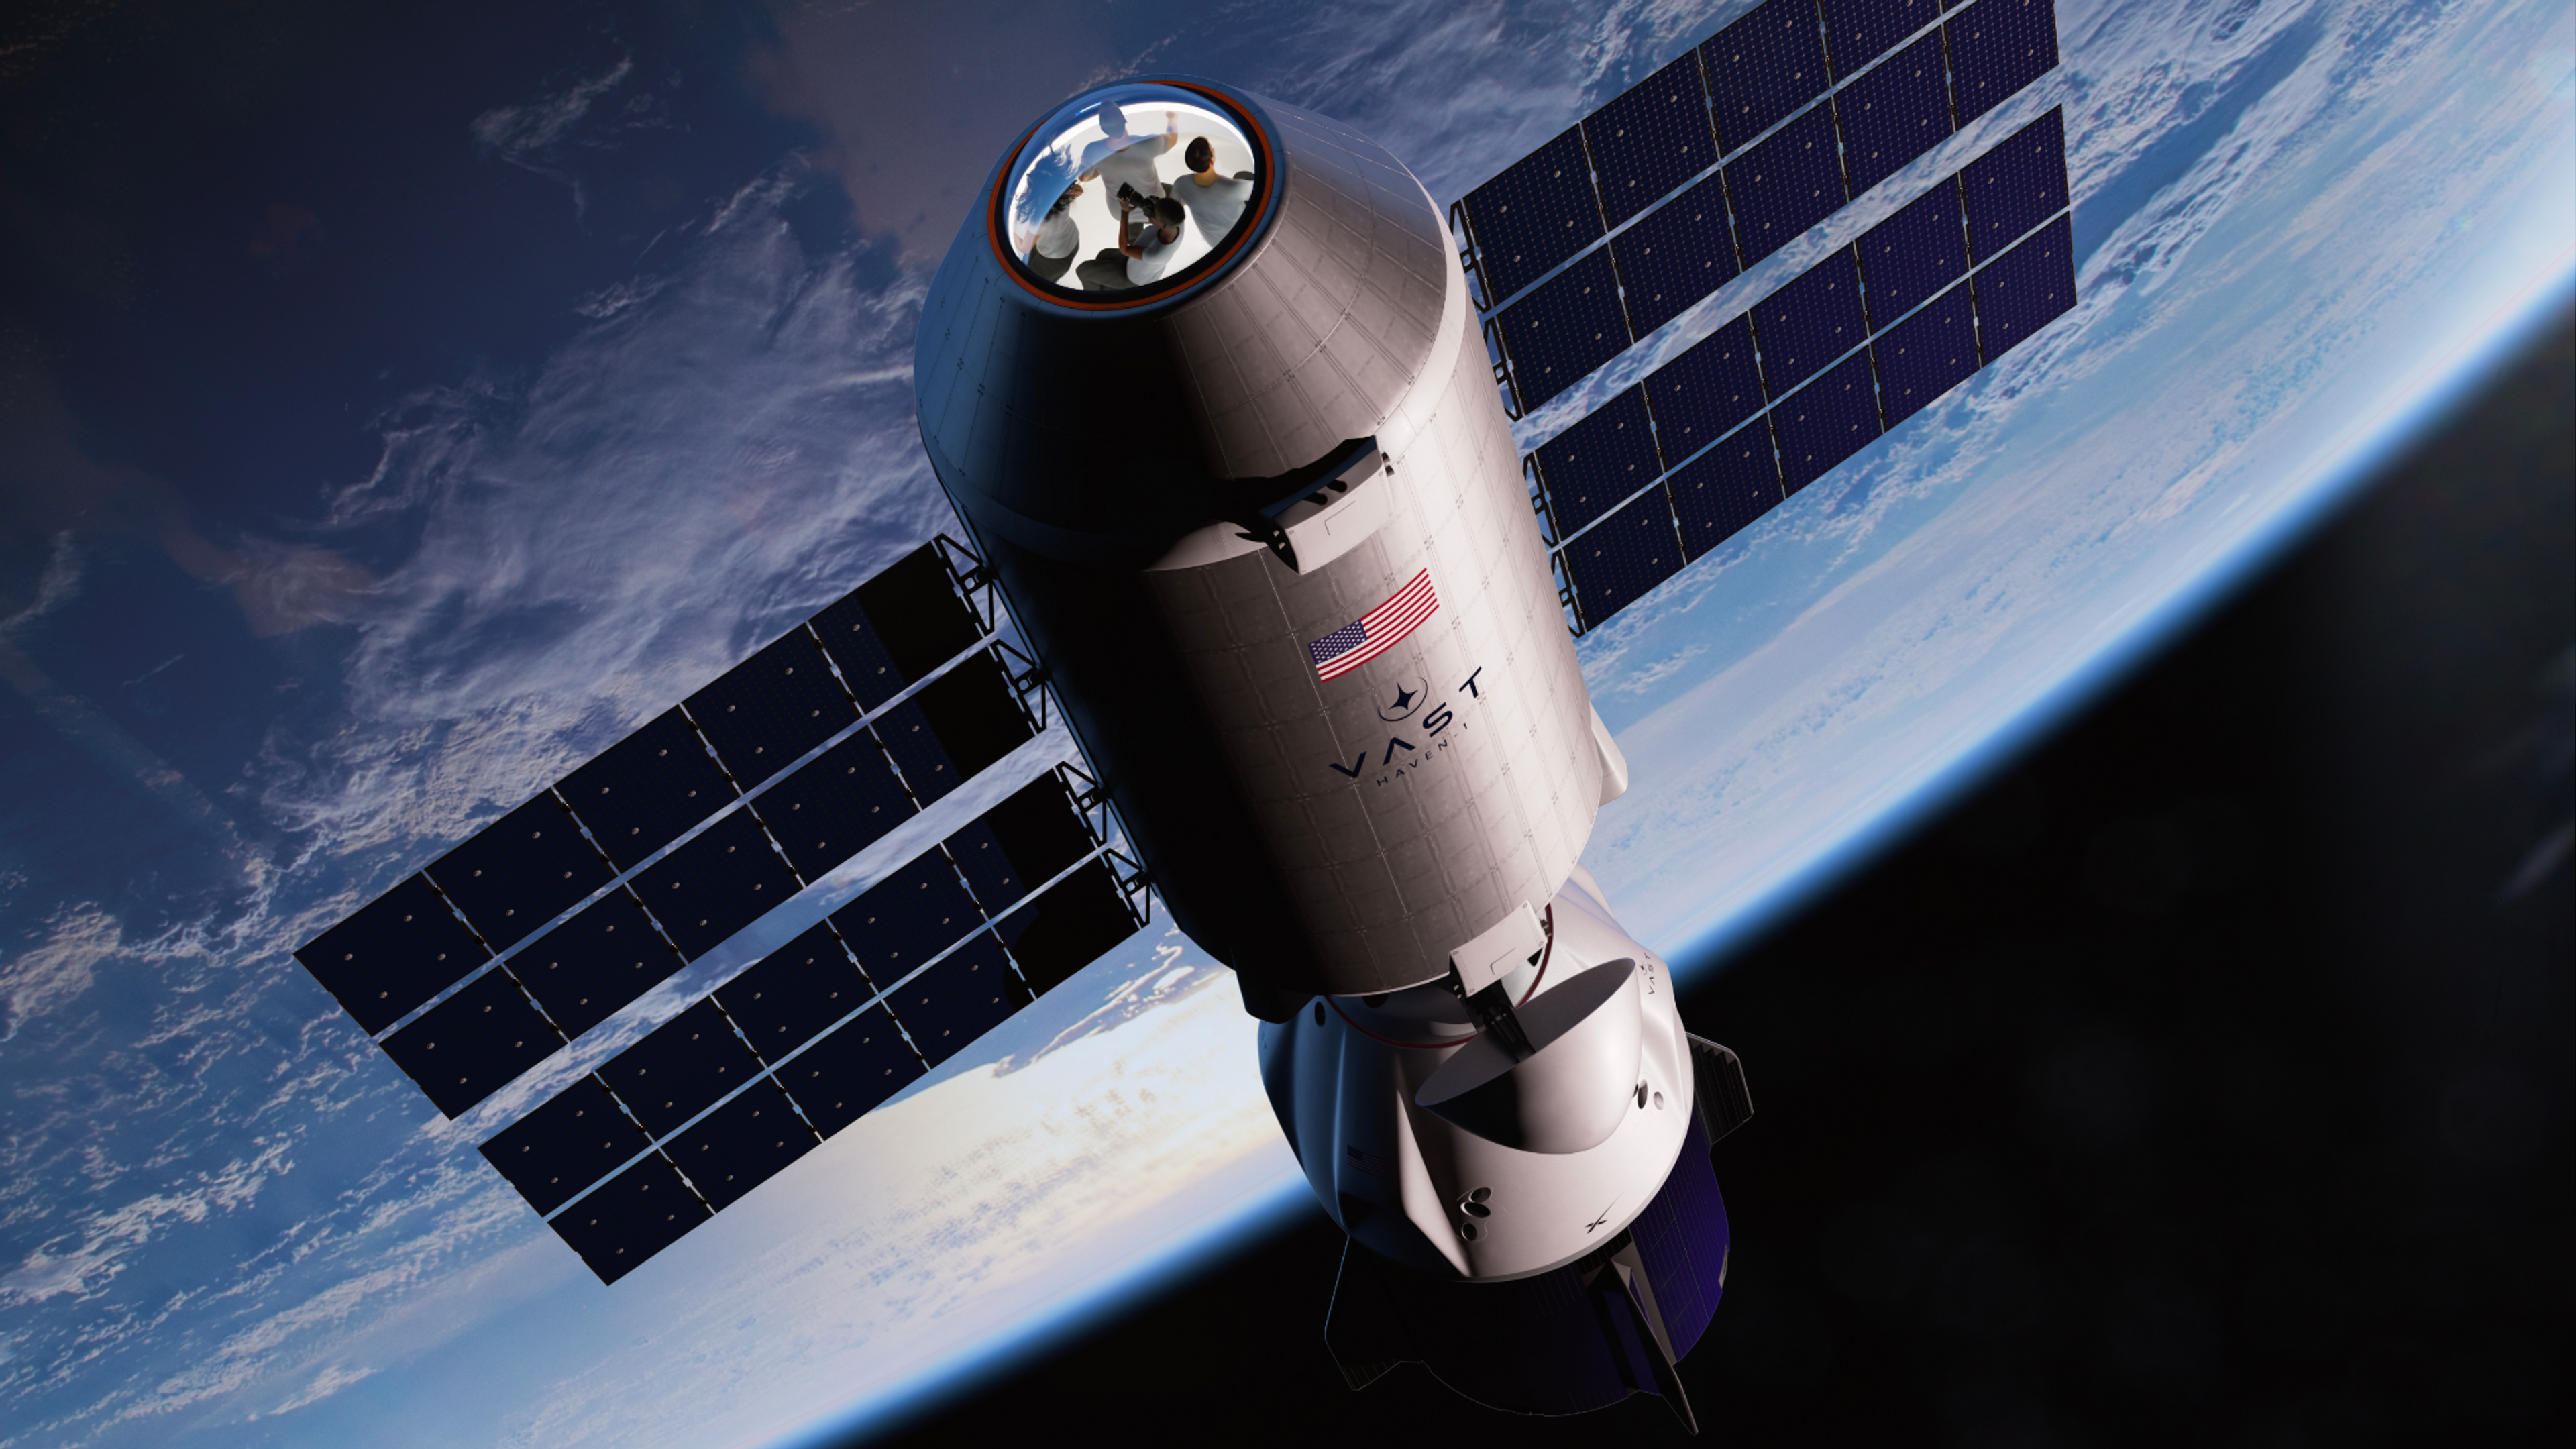 Illustration: Vast Haven-1 and SpaceX Dragon